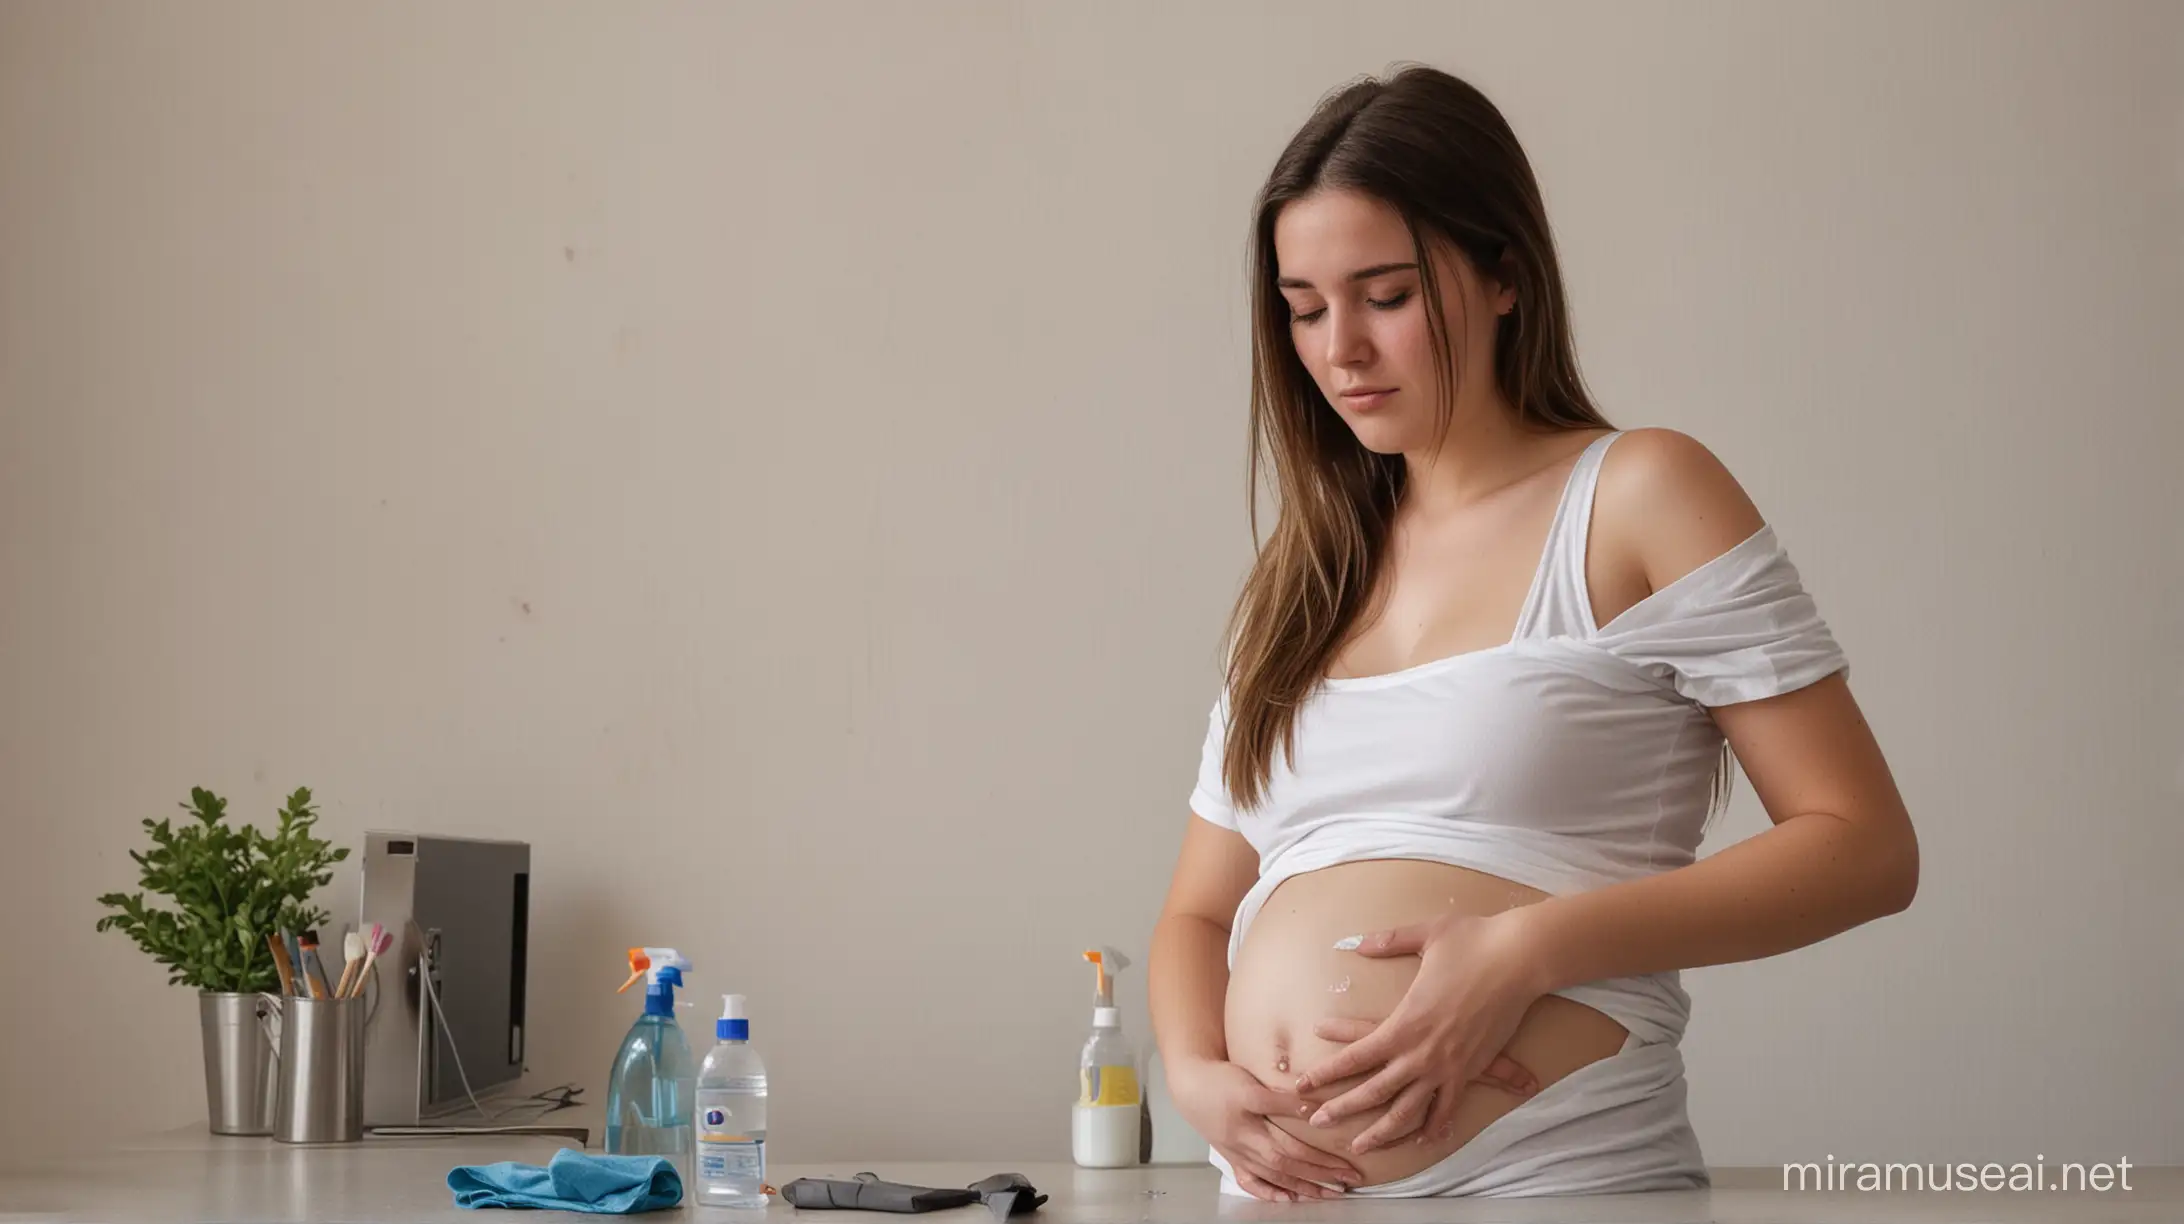 Teenage Cleaning Worker in Italy Suffers Pregnancy Discomfort